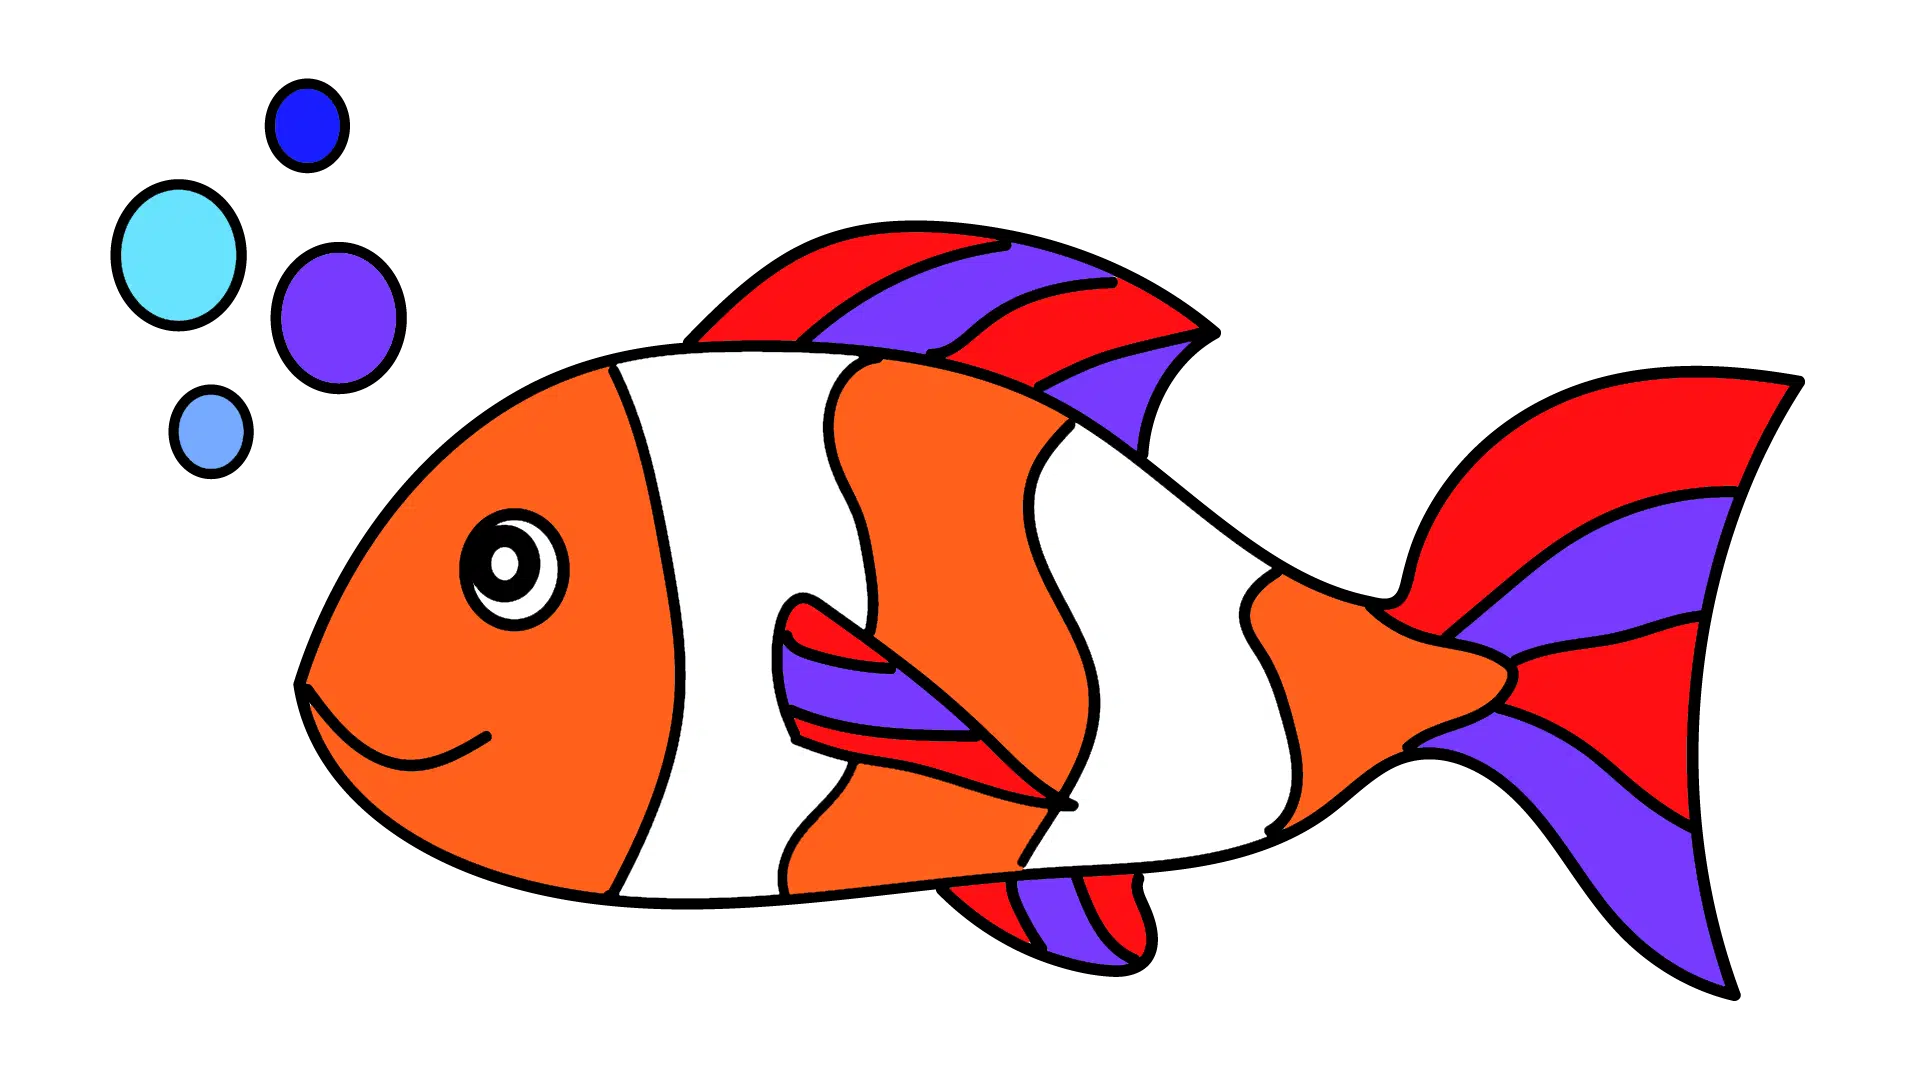 How To Draw A Fish: Easy Step-By-Step Tutorial For Kids